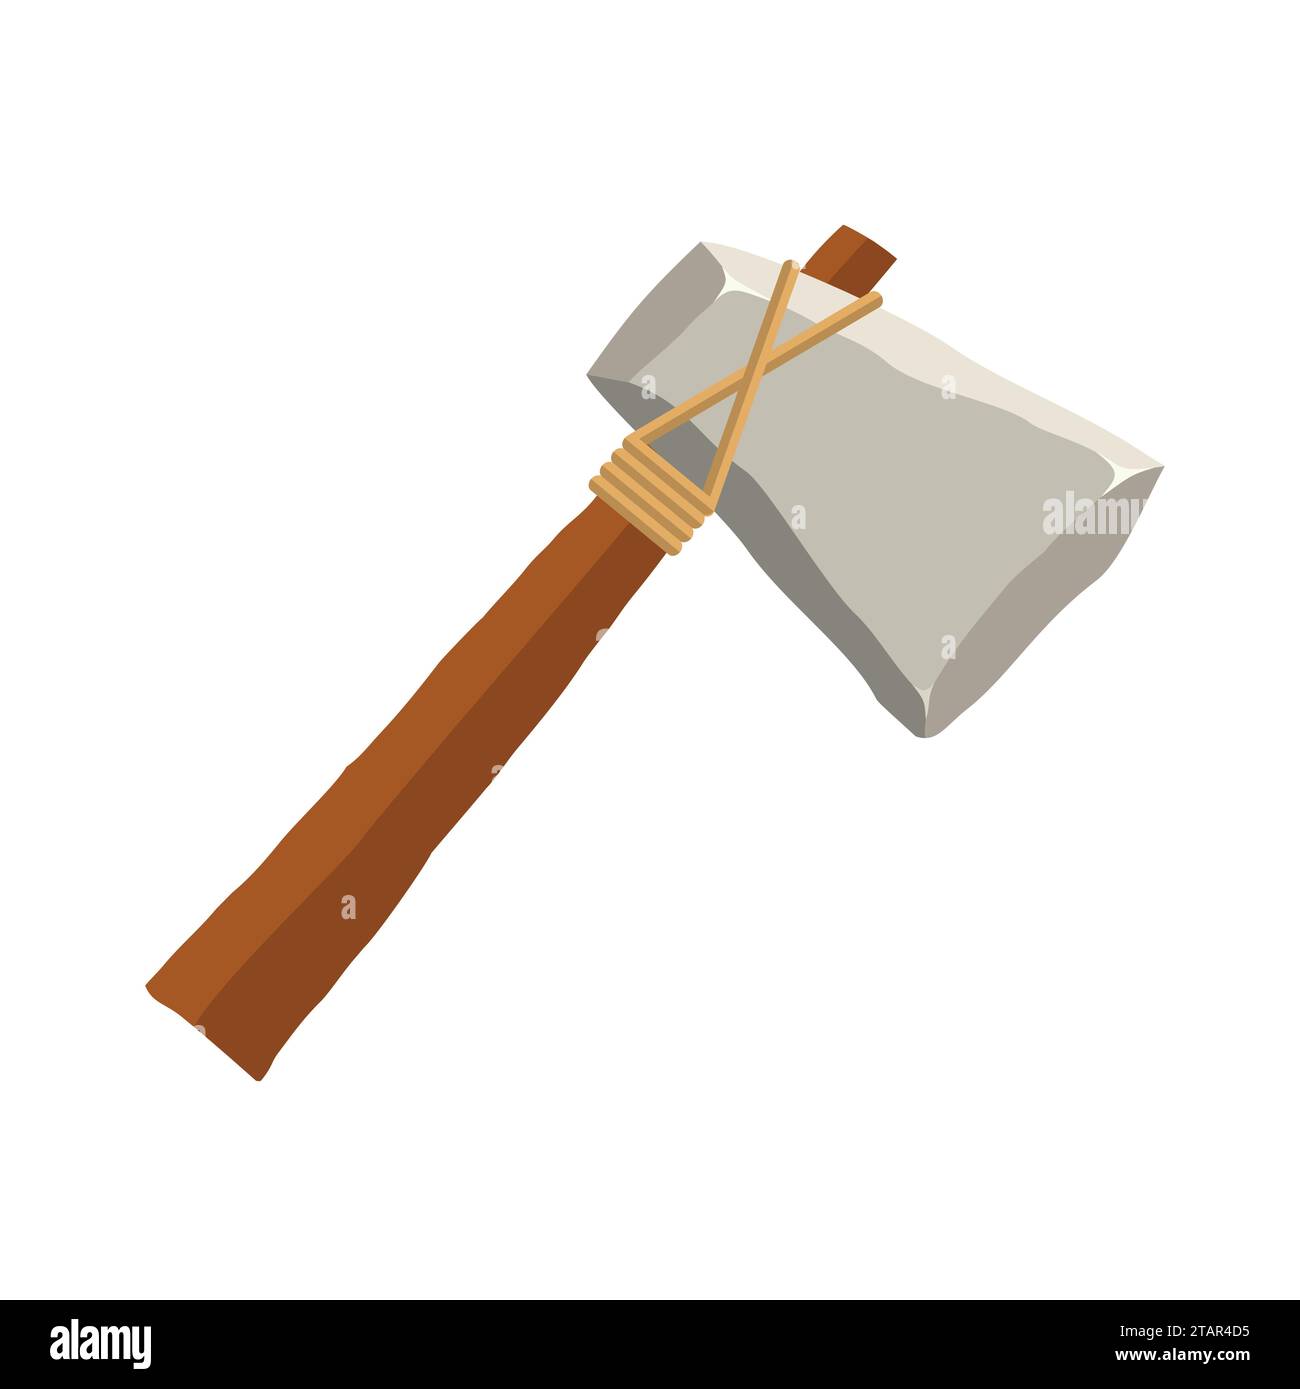 Stone axe isolated on white background. Ancient tool and weapon in flat style. Vector illustration. Stock Vector